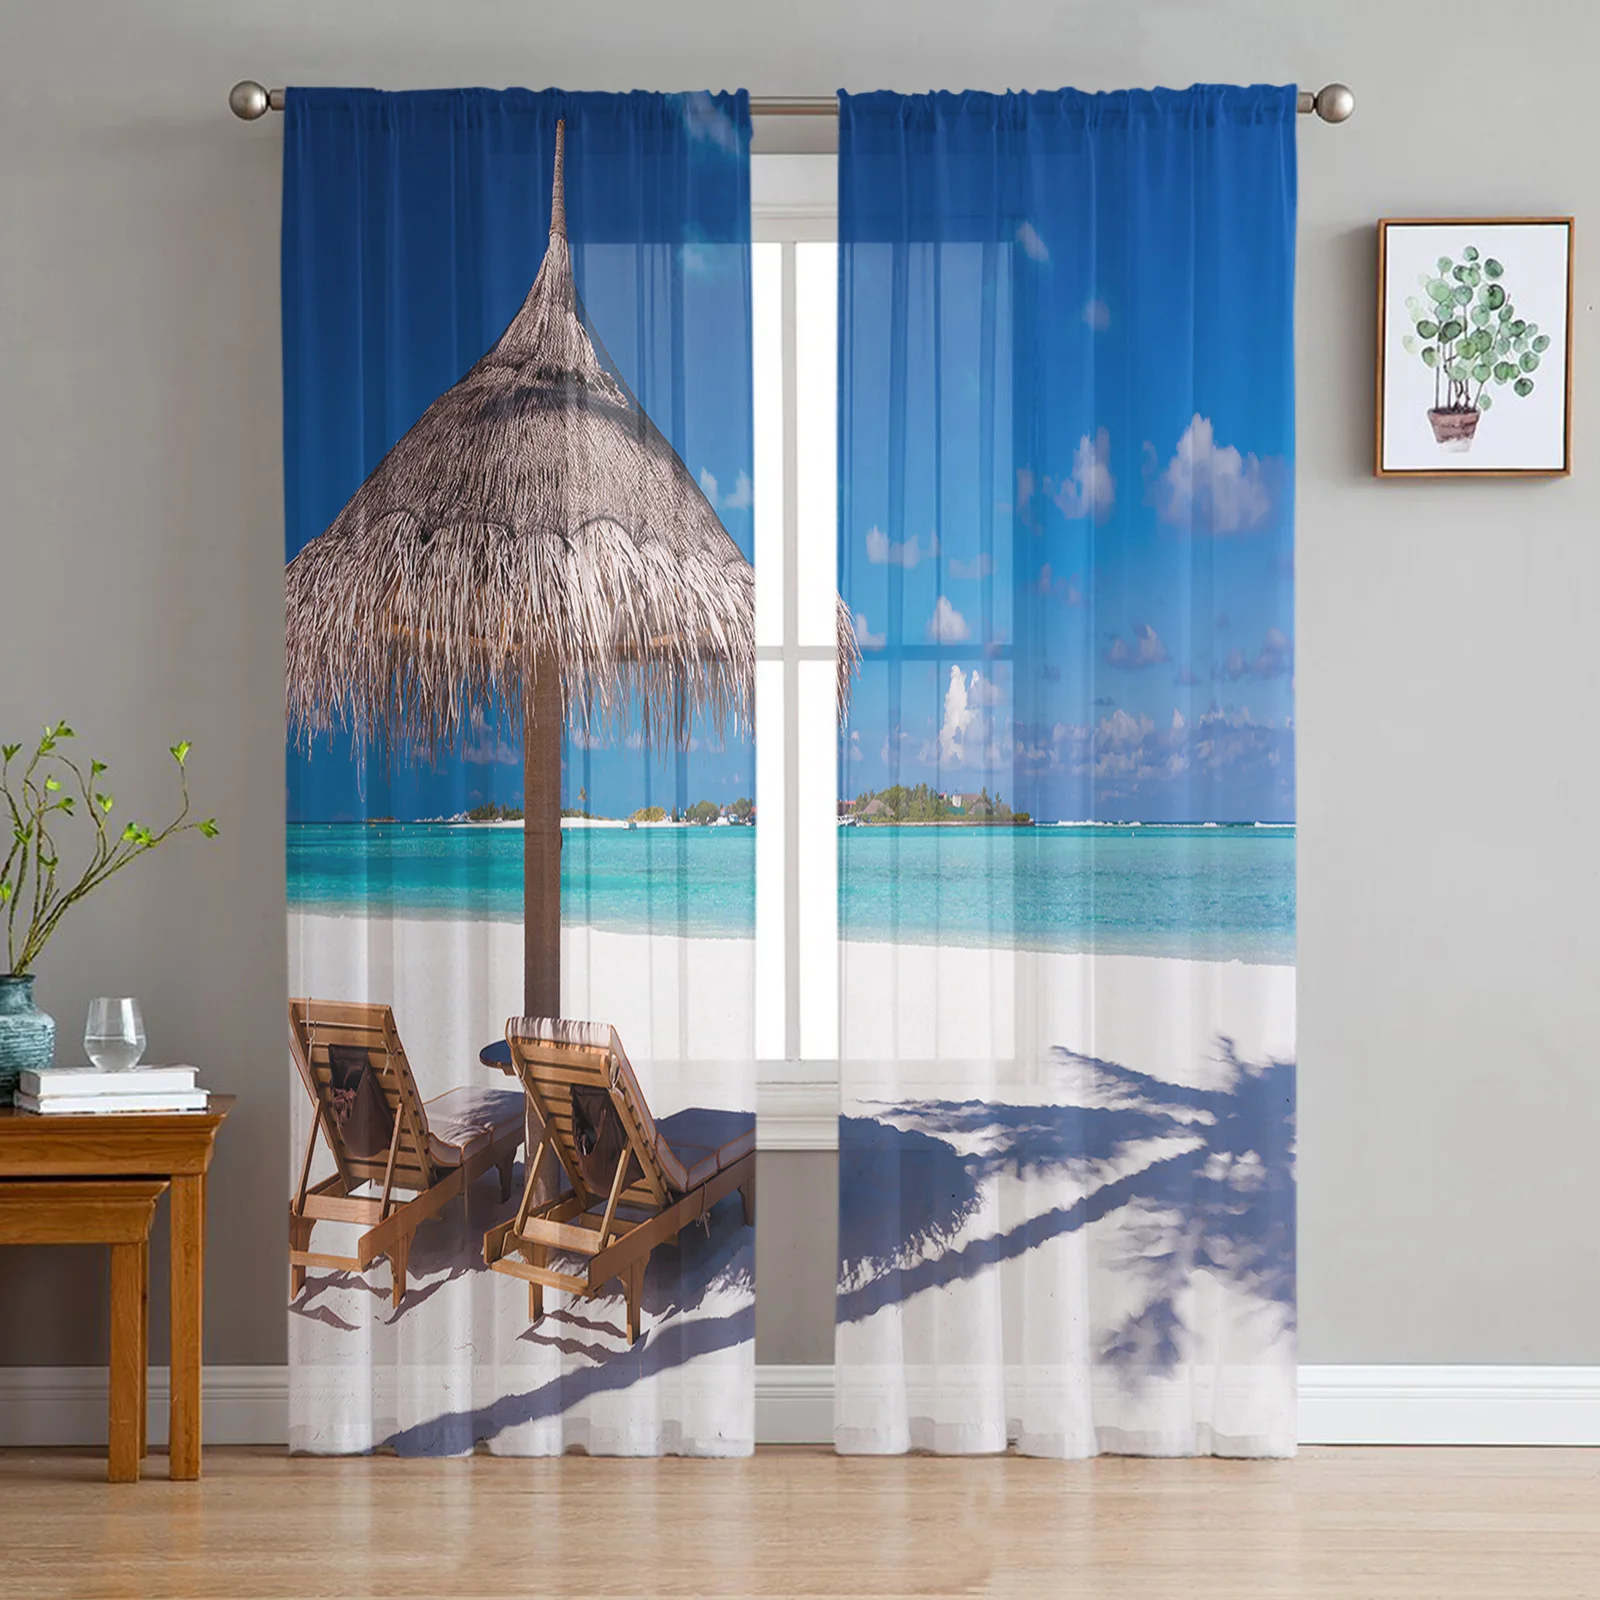 Seaside Scenery White Sand Beach Ocean Tulle Sheer Window Curtains for Living Room Bedroom Modern Voile Organza Curtains Drapes